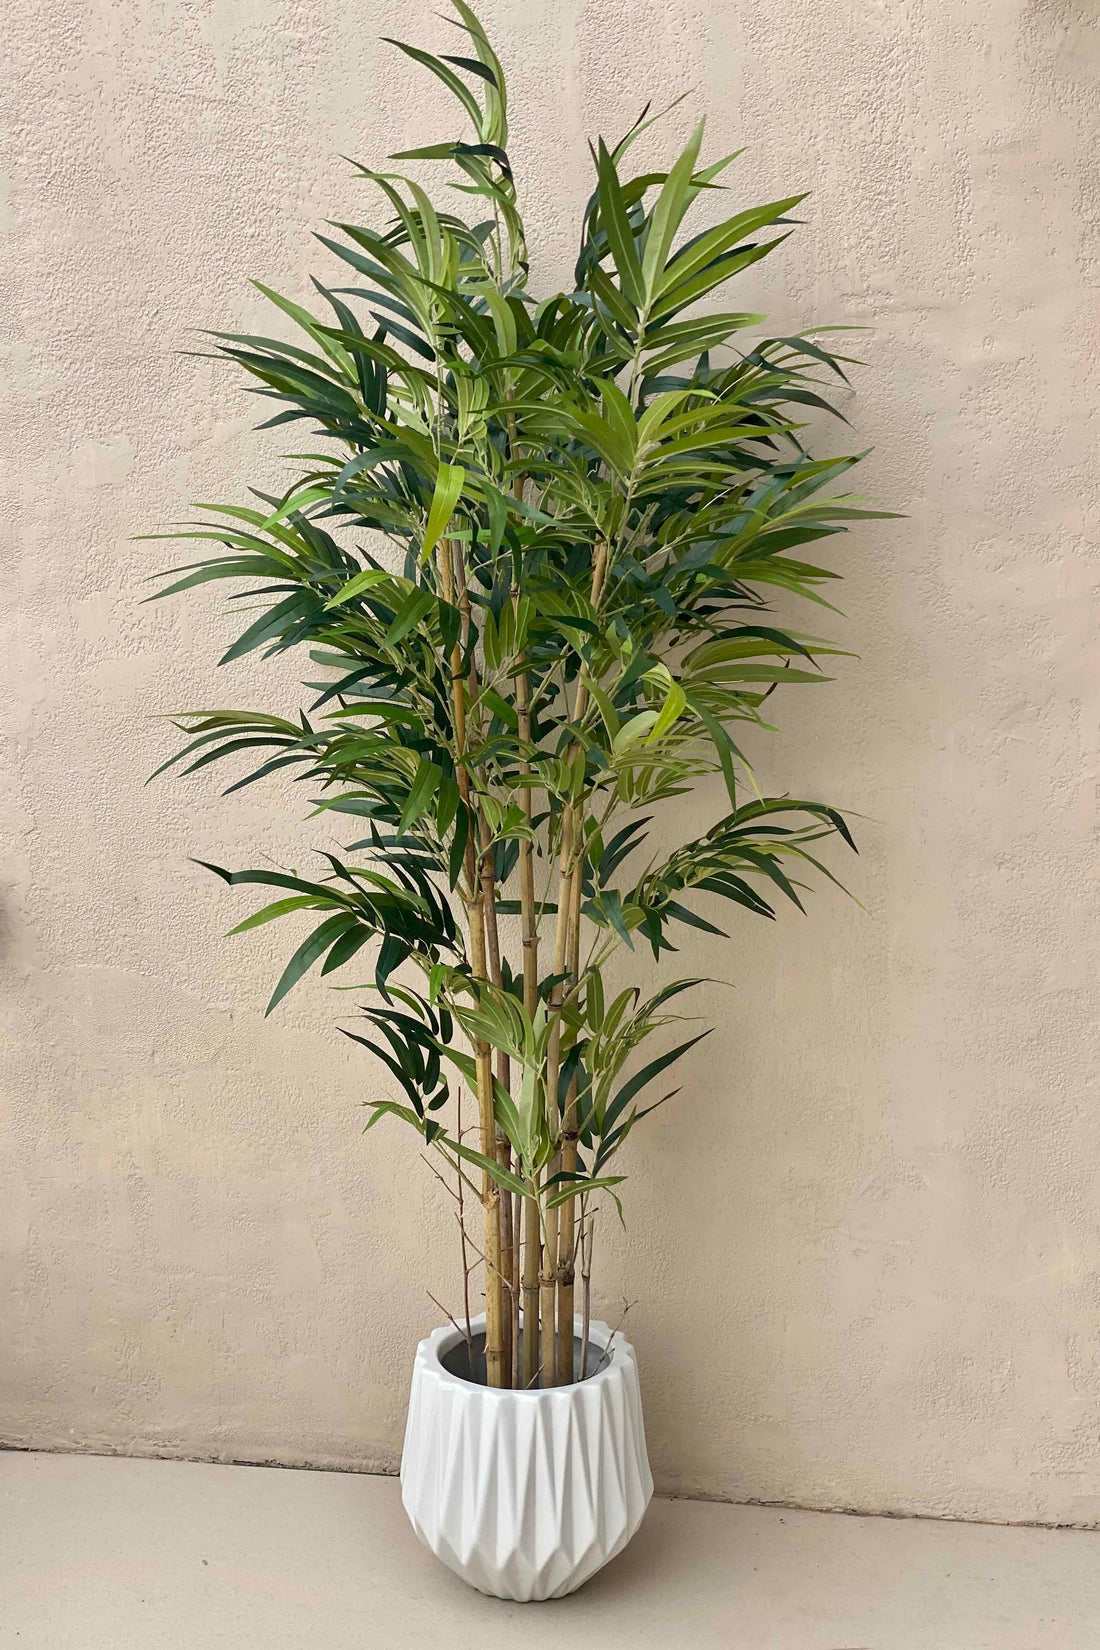 Artificial Bamboo Plant - 5.5 Feet (With Base Pot)